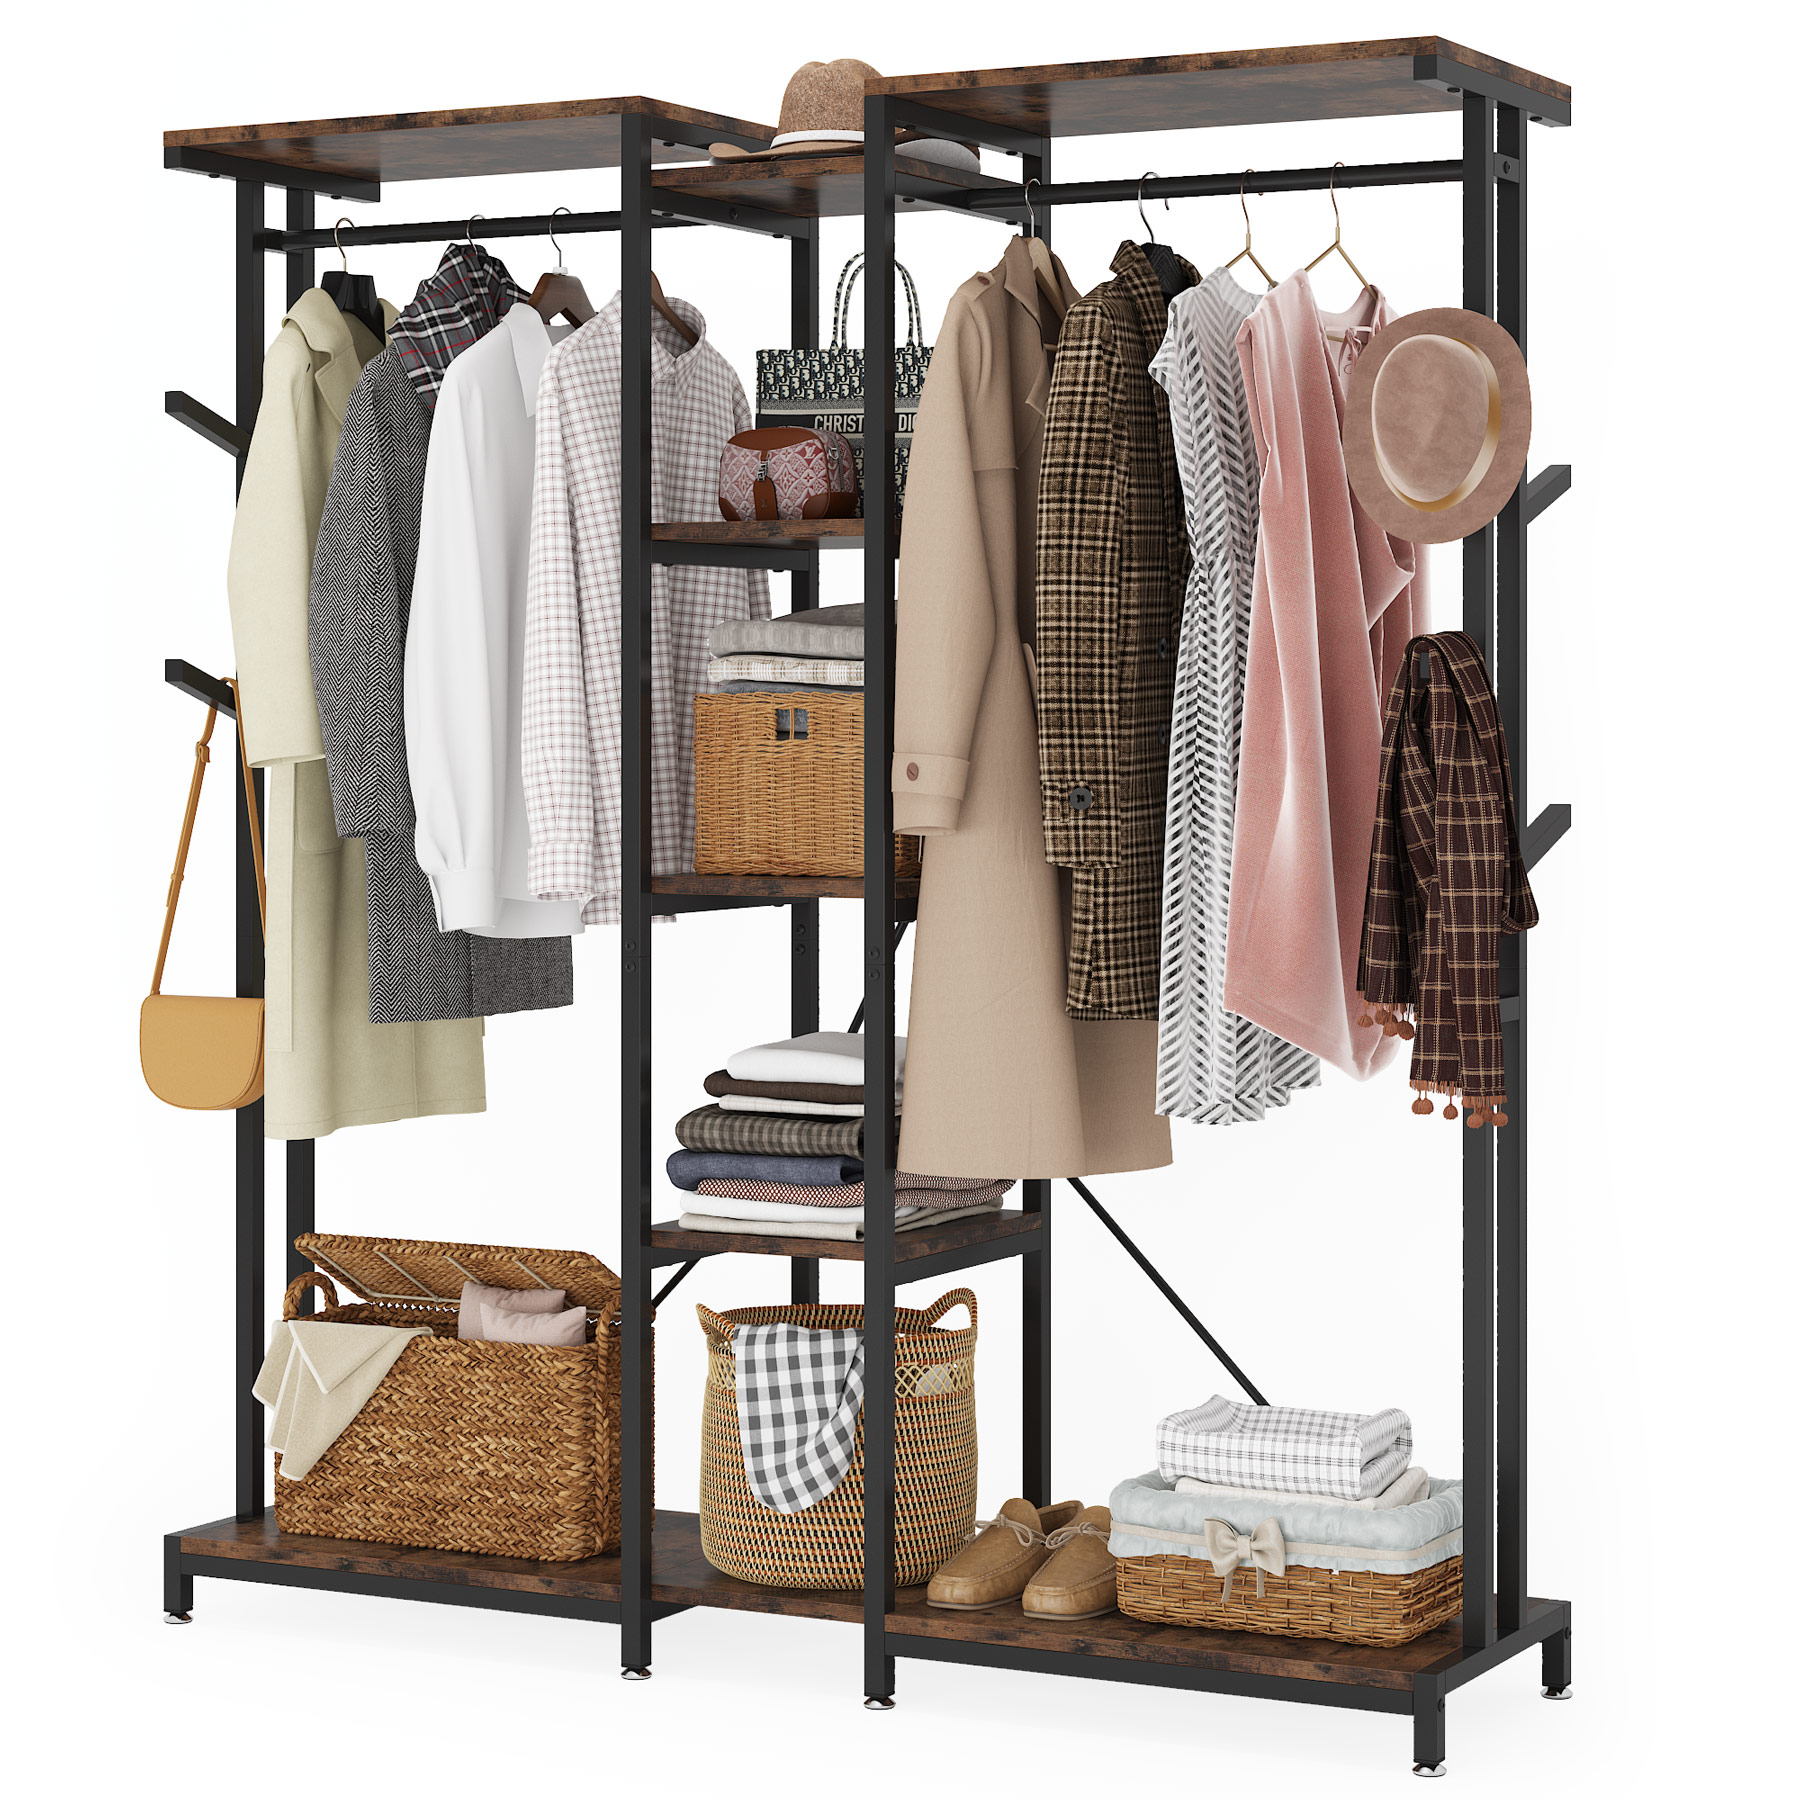 Tribesigns Freestanding Closet Organizer, Clothes Rack with Drawers and Shelves, Heavy Duty Garment Rack Hanging Clothing Wardrobe Storage Closet for